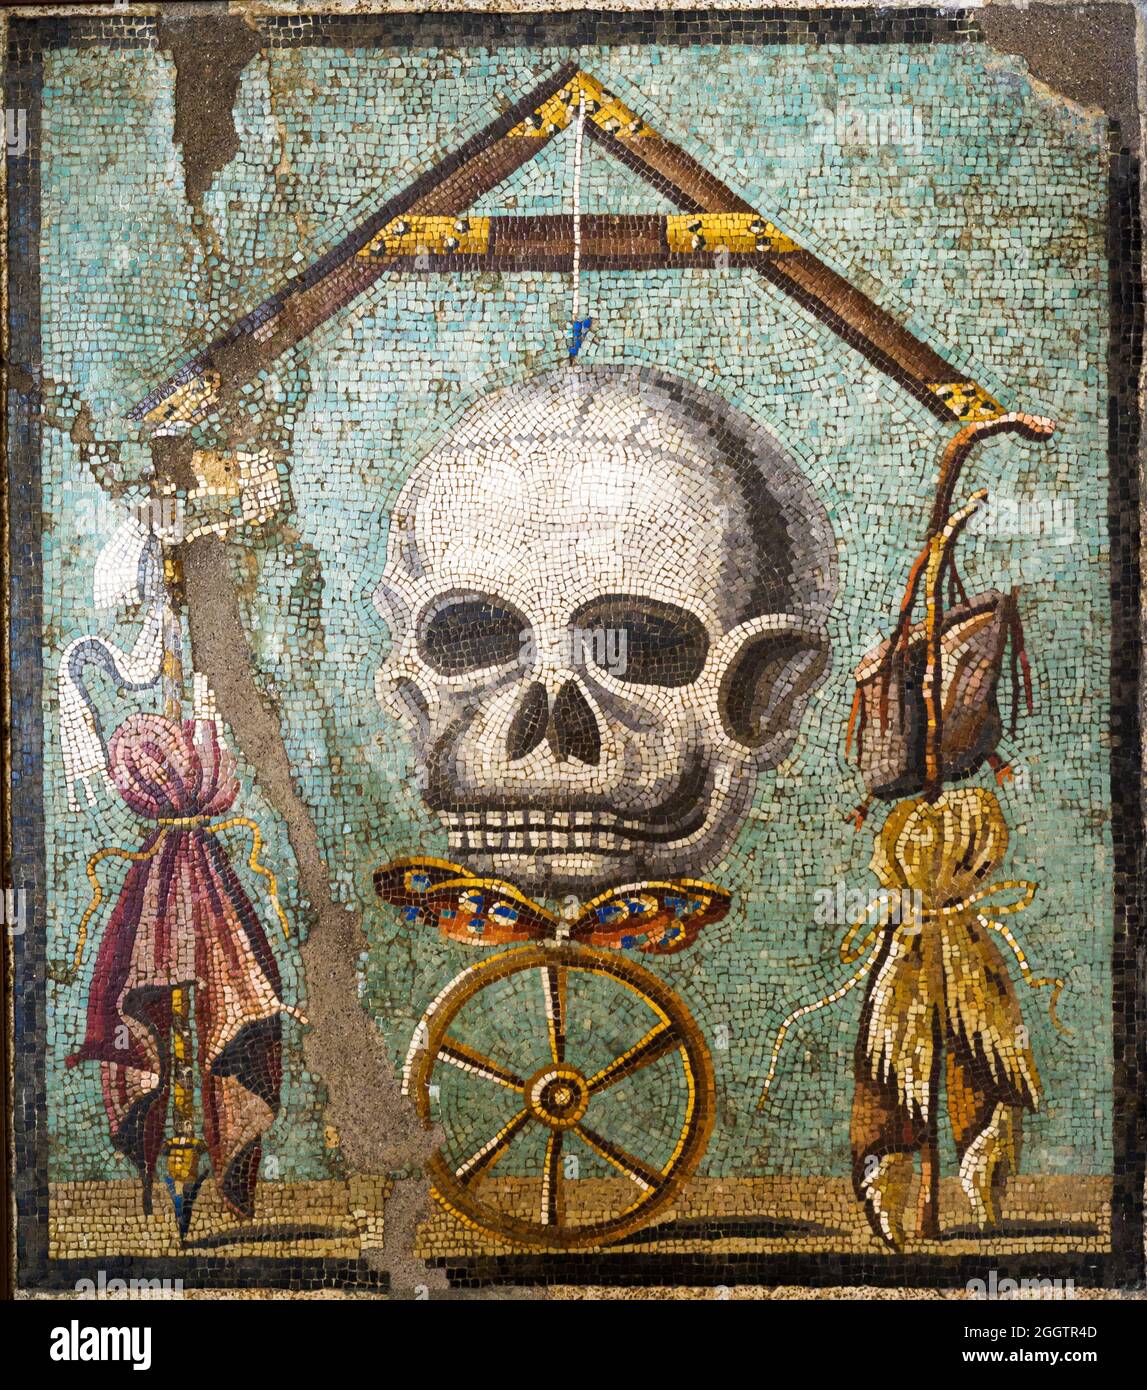 Memento Mori Mosaic emblema in opus vermiculatum made from polychrome tesserae. The mosaic depicts the allegory of death which levels distinctions between human beings. At the top of the composition there is a plumb-bob with its plumb-line whose axis is death in the form of a skull; below there is a butterfly, the soul, on a wheel, symbolising Fortune: between the arms of the plumb-blob are the symbols of poverty on the right (the saddlebag, the beggar's stick and the cloak) and the symbols of wealth on the left (the sceptre, purple and the crown).  Pompeii, casa bottega (shop house) - Italy Stock Photo